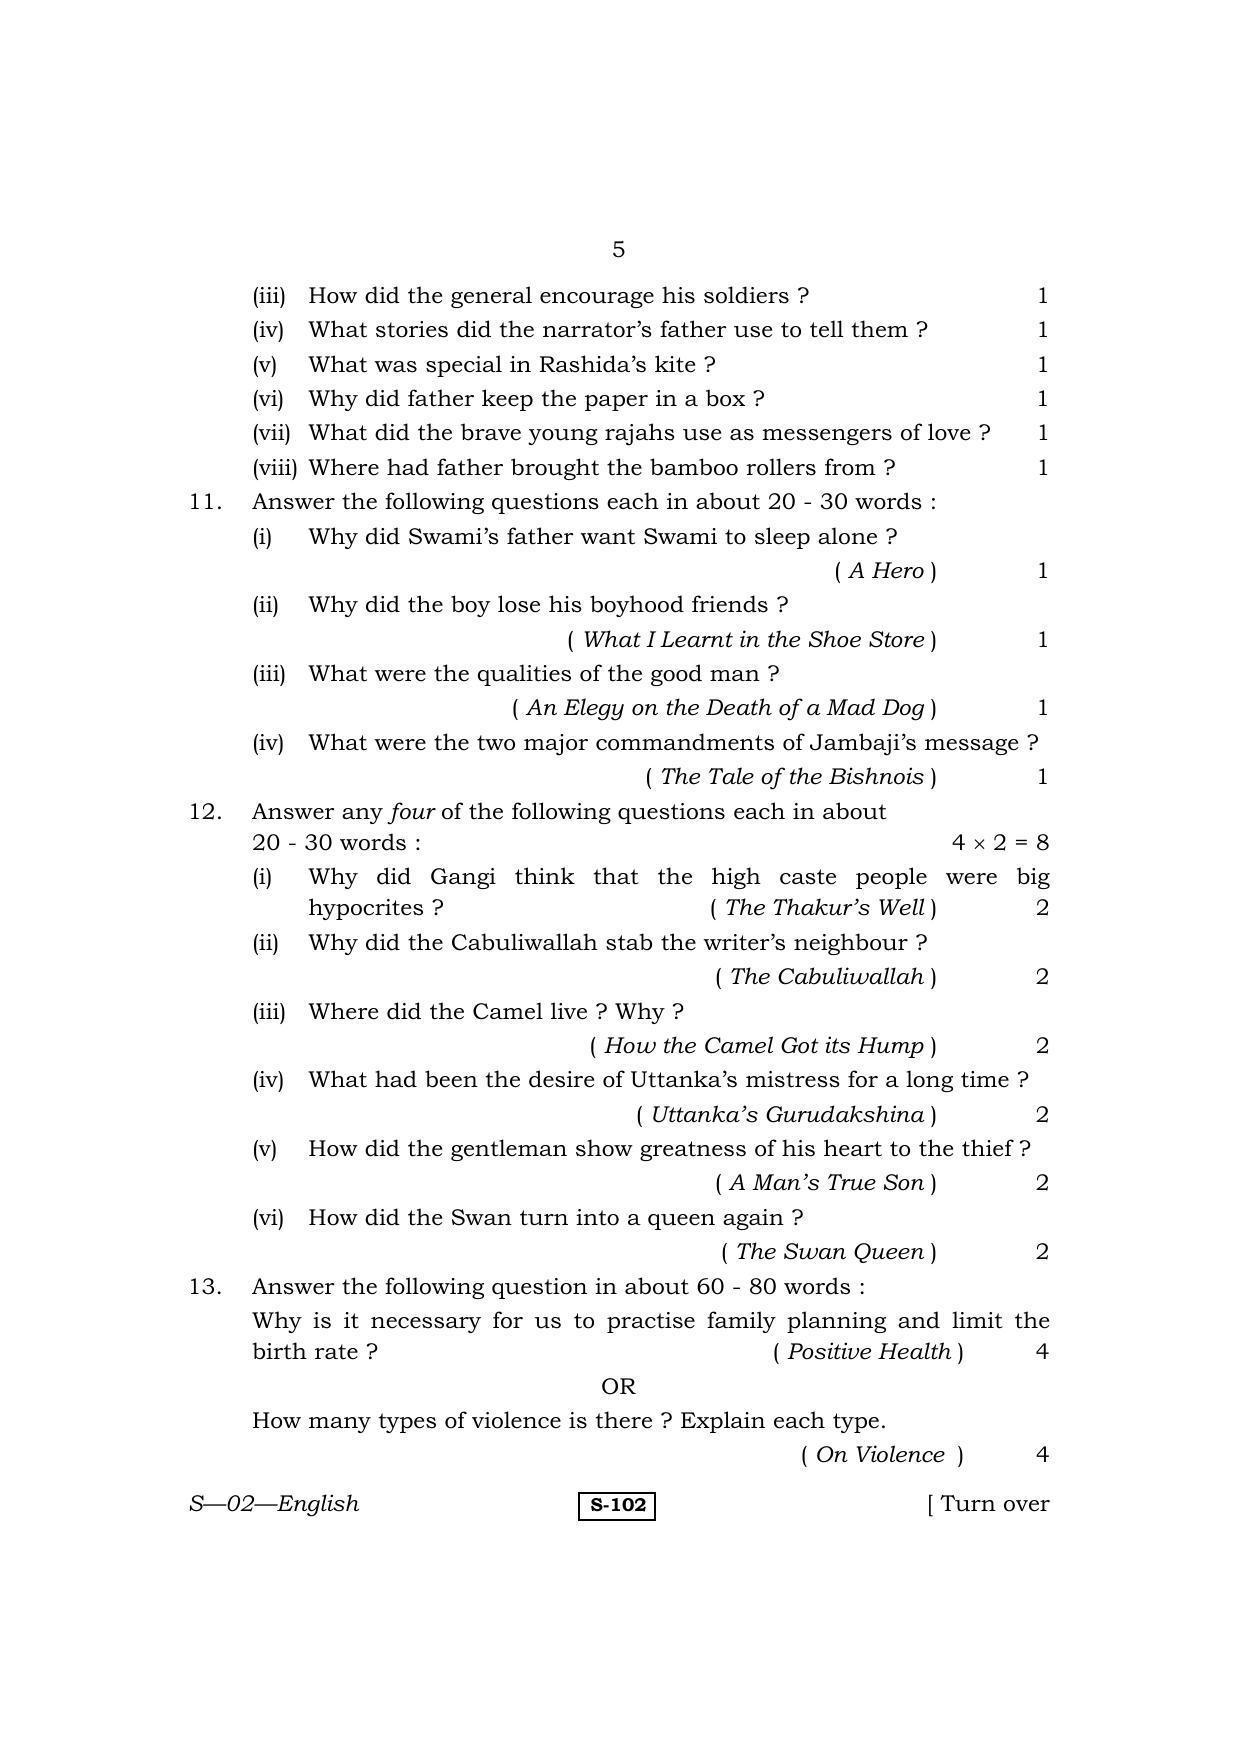 RBSE Class 10 English 2011 Question Paper - Page 5